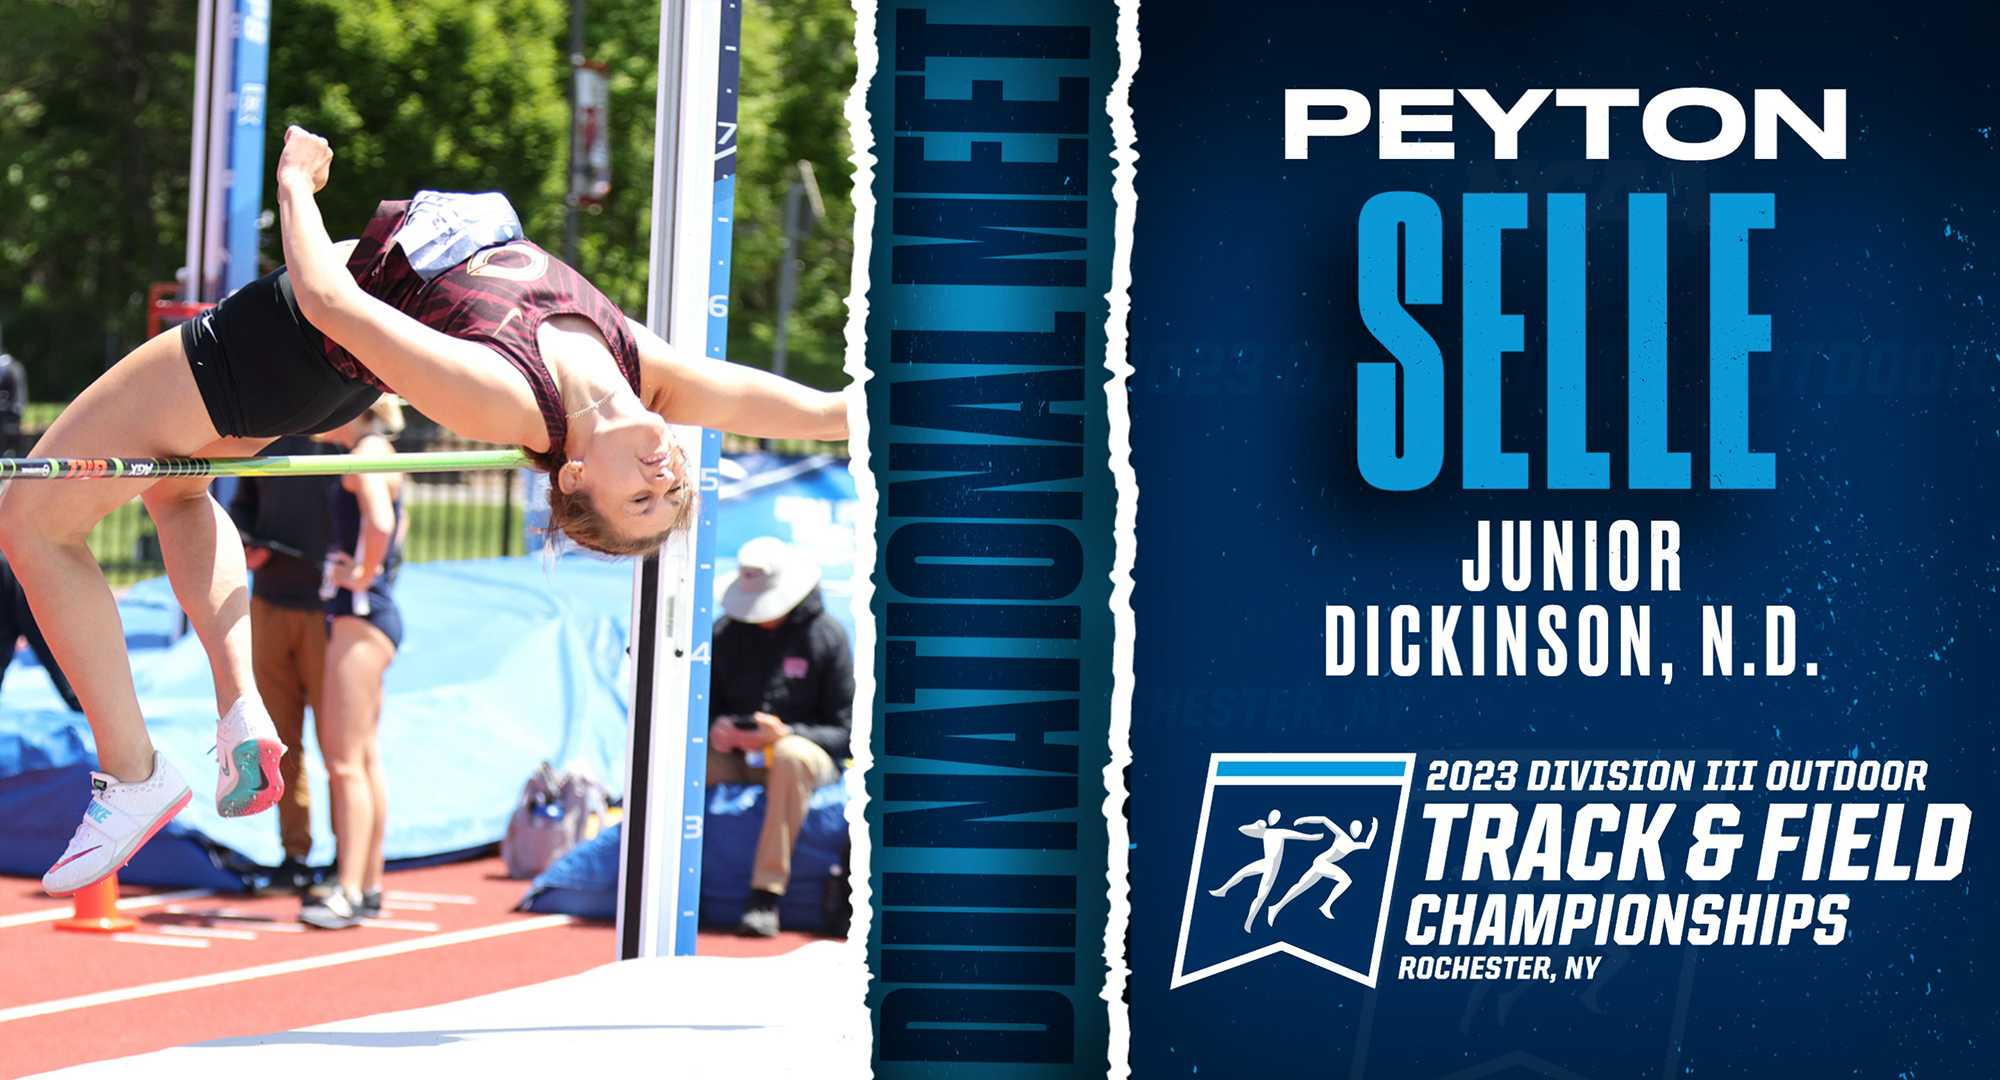 Peyton Selle clears the bar in the high jump in the heptathlon at the NCAA DIII National Meet. She posted a PR point total of 4,565 points.